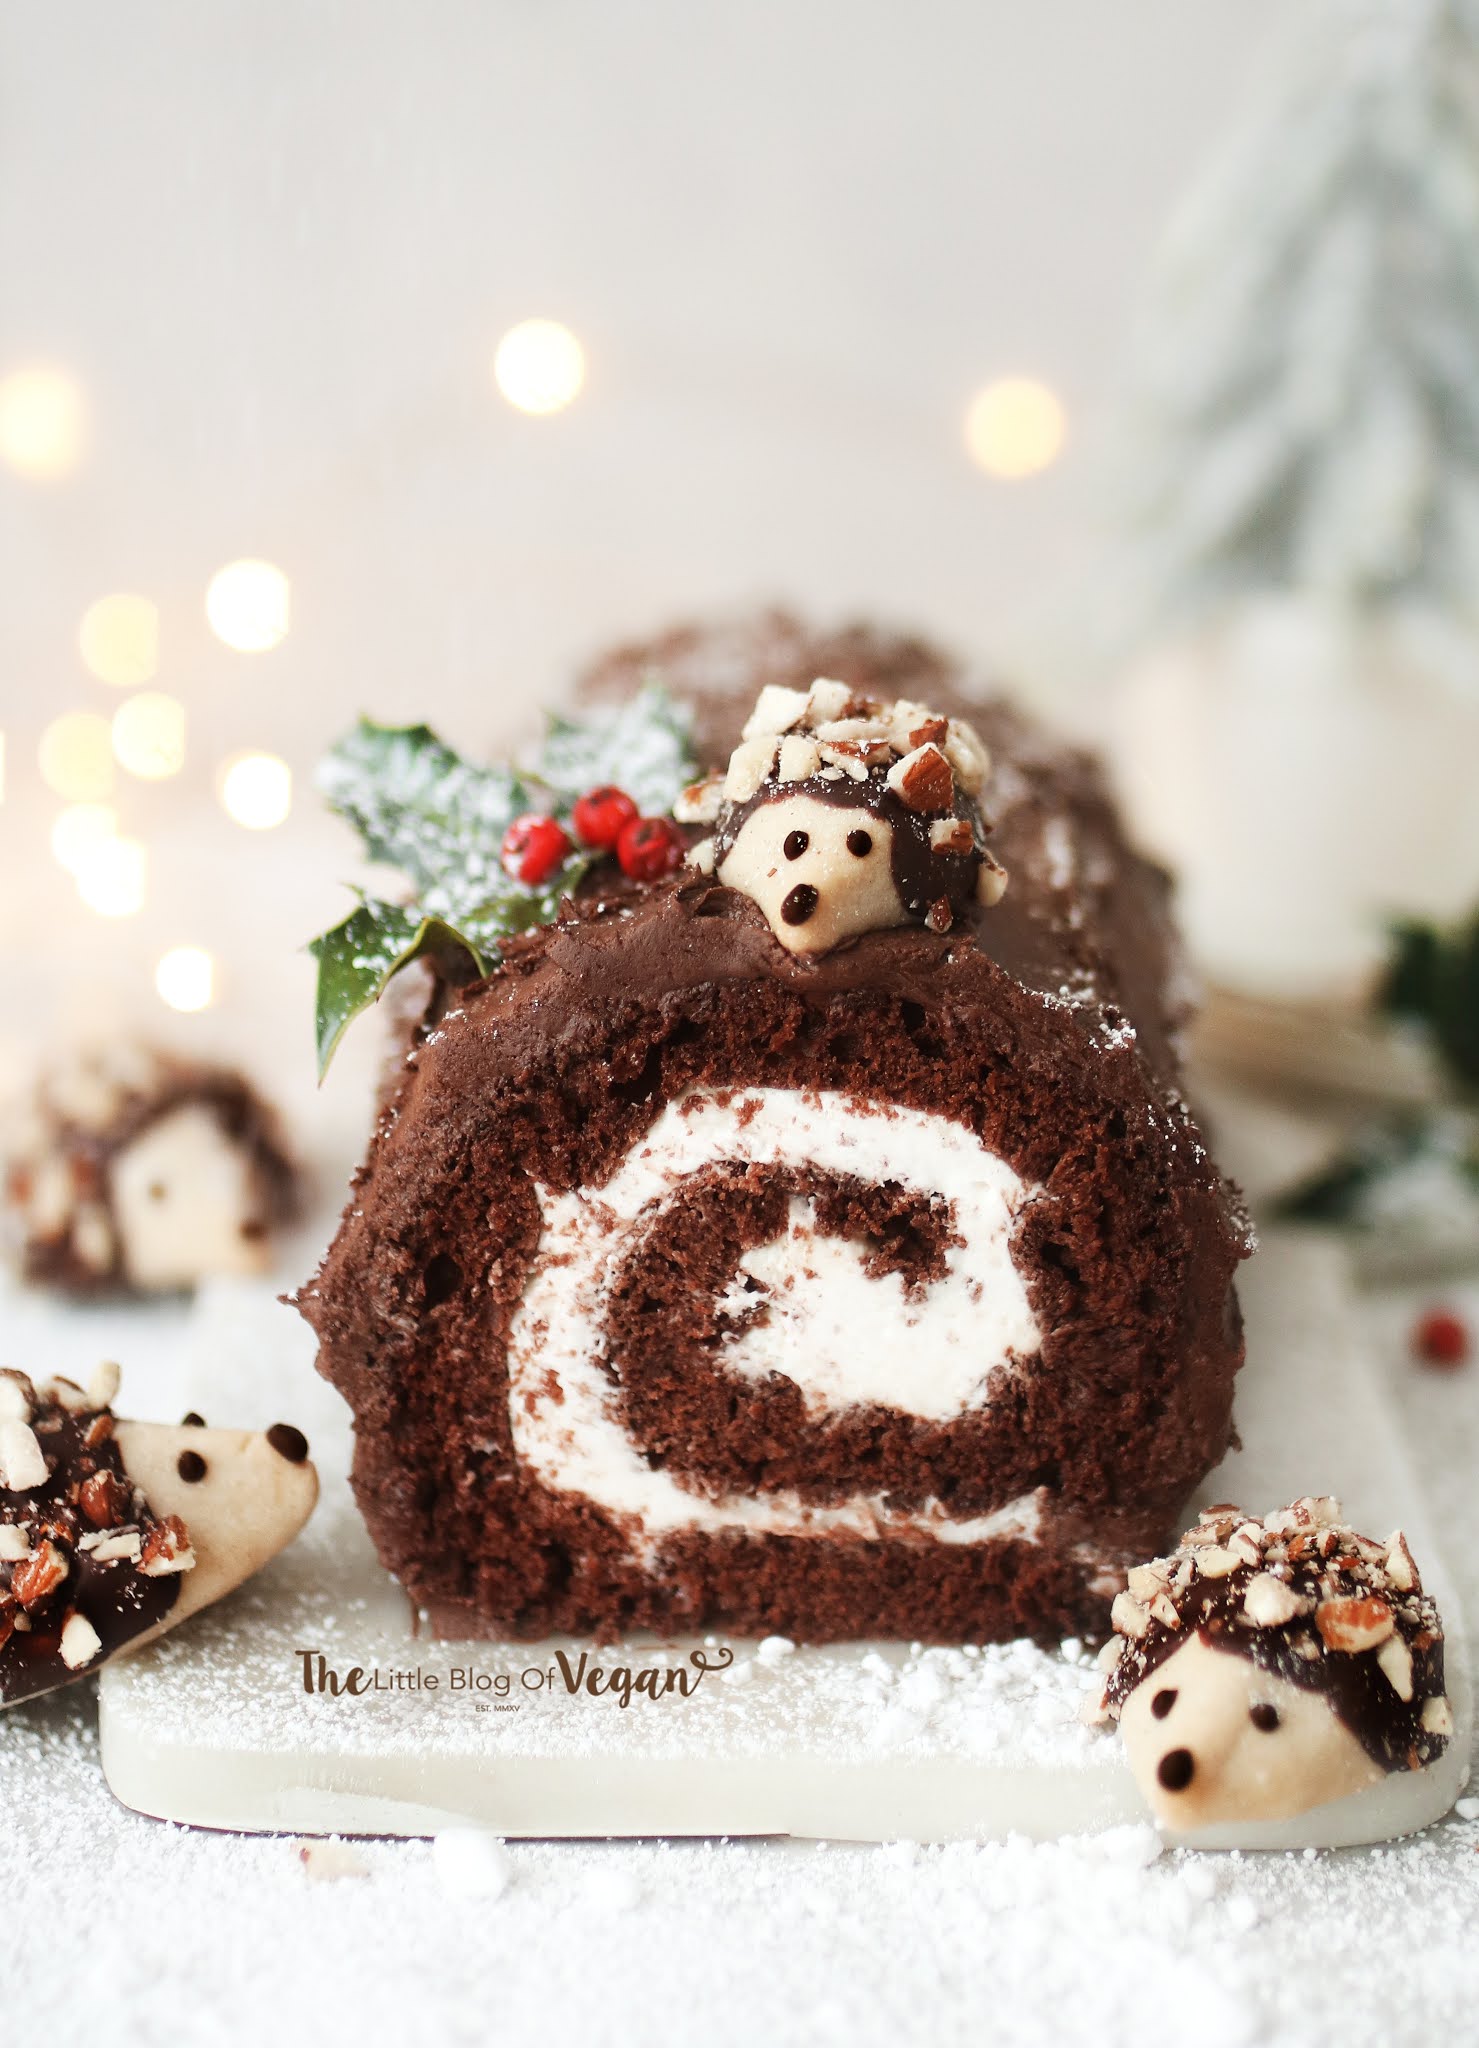 A vegan chocolate roll with holiday hedgehogs on it.